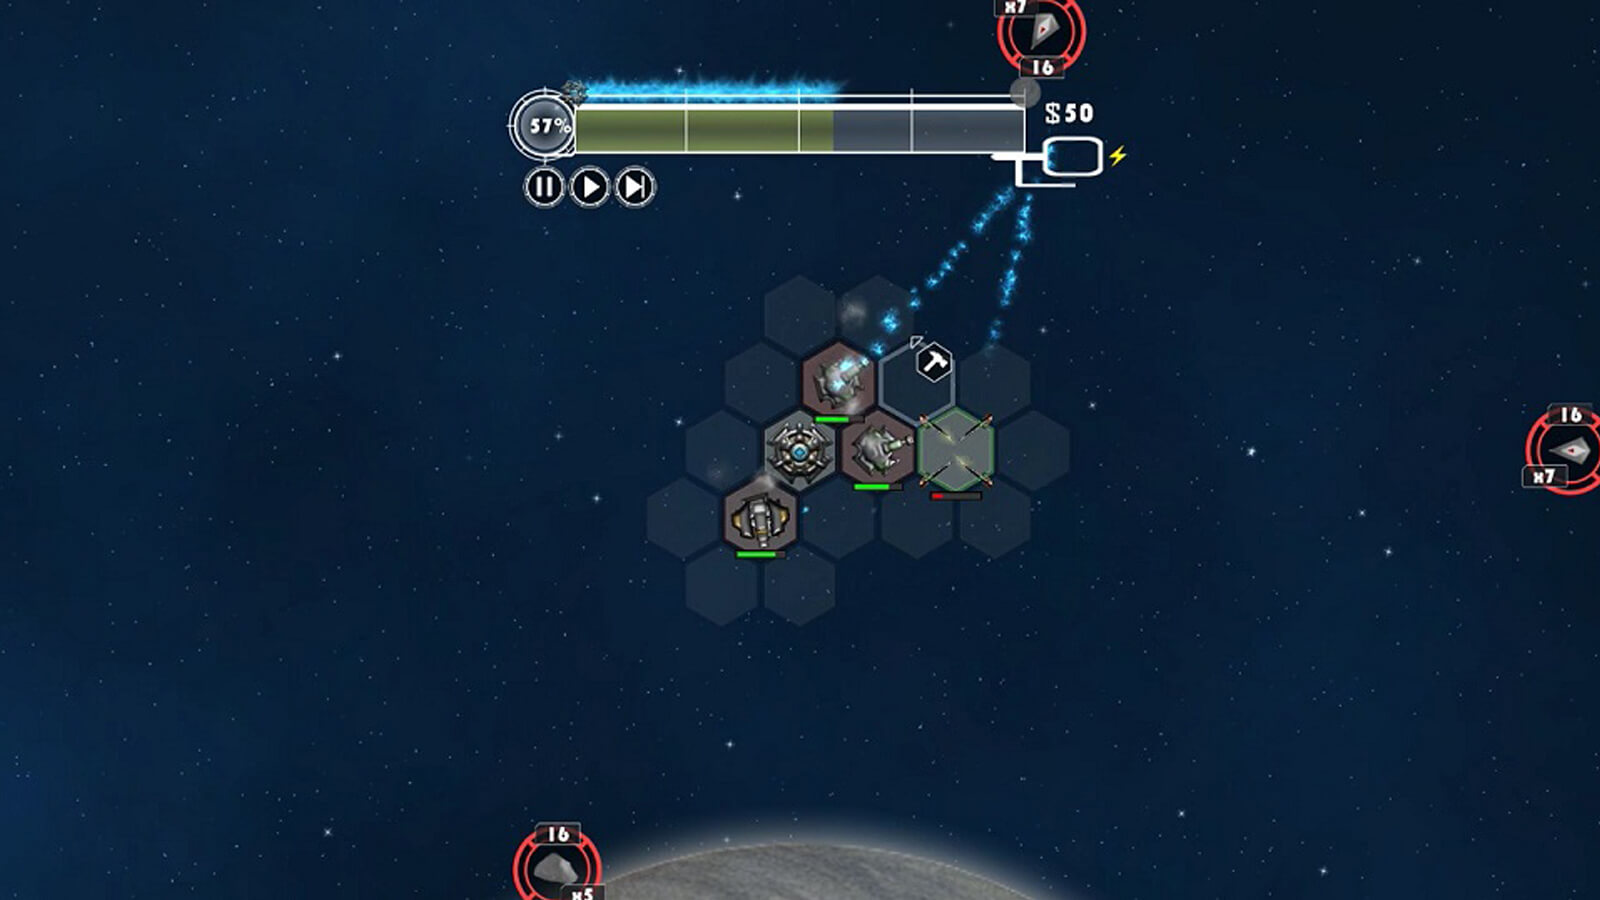 Various turrets with damage indicators are placed in the player's hexes as vital statistics are displayed above